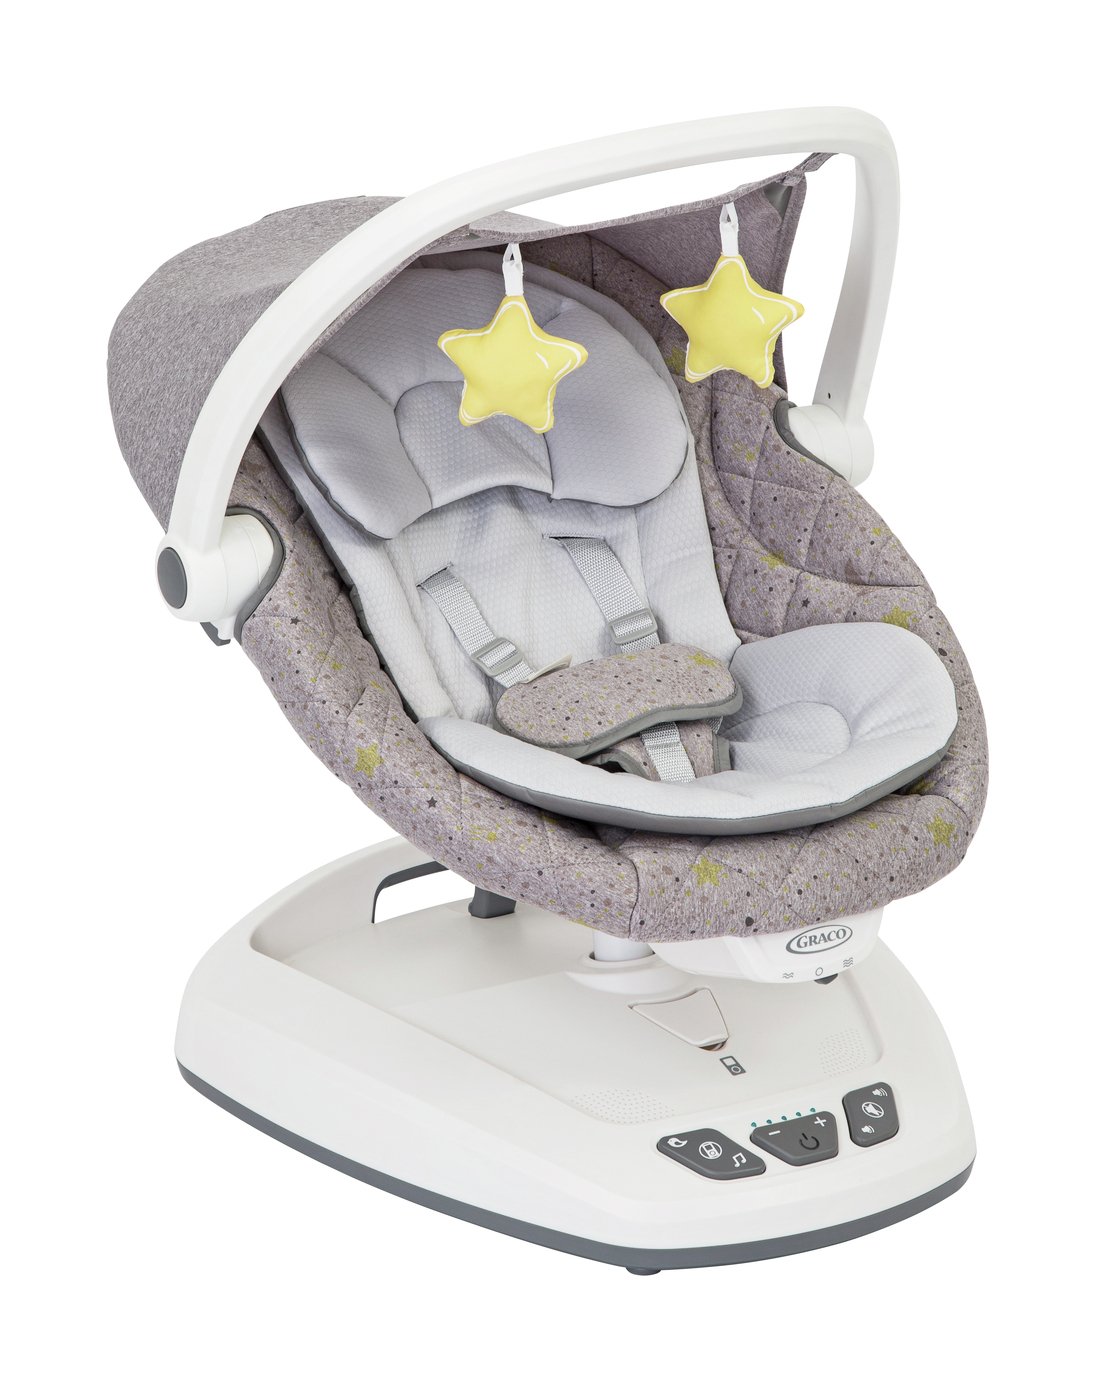 Graco Move With Me Baby Swing with Canopy Stargazer Review